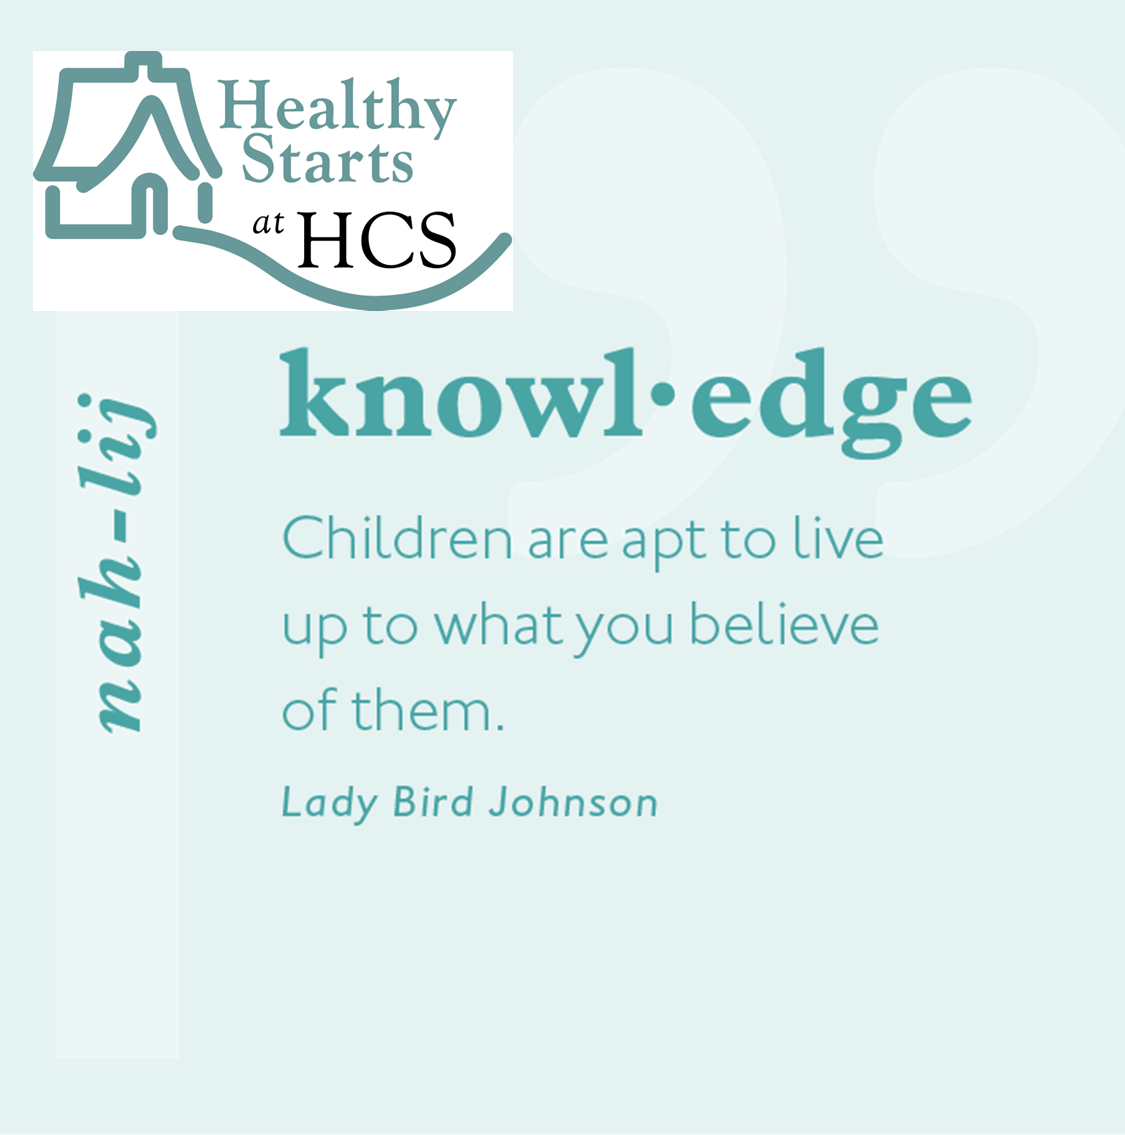 Quote from Lady Bird Johnson saying: Children are apt to live up to what you believe of them.